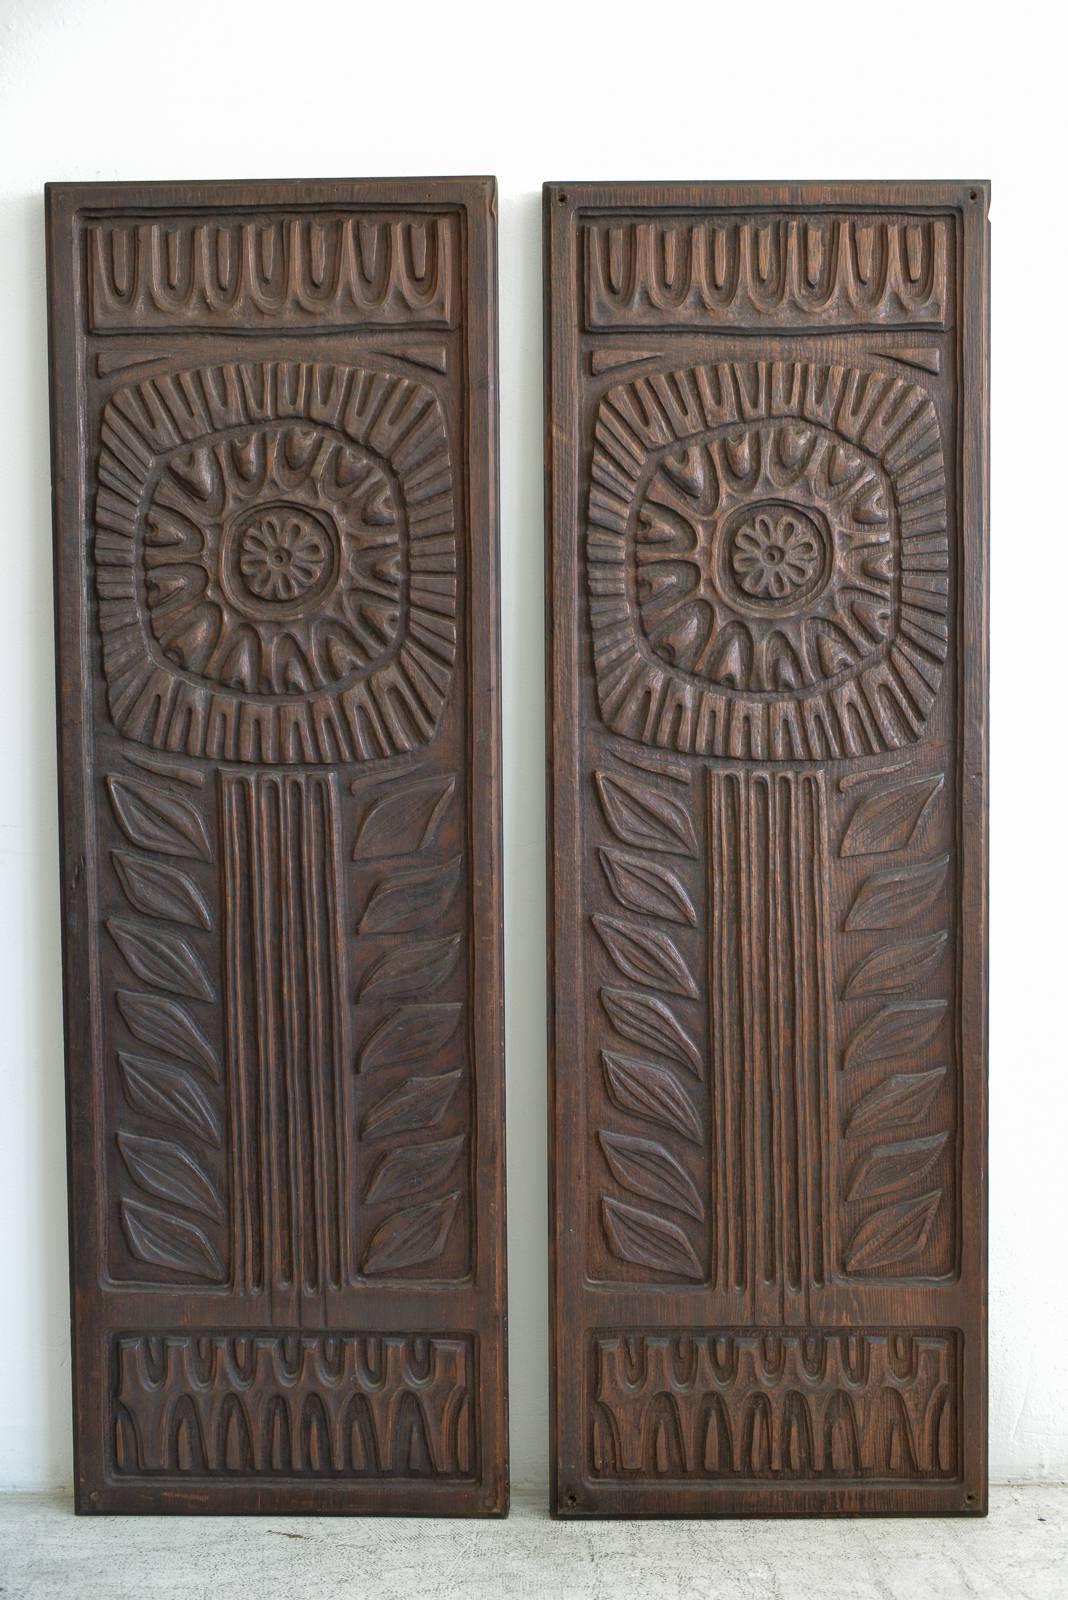 Pair of large-scale Evelyn Ackerman wood panels, 'Flower', circa 1960

Heavy, large-scale panels that can be used as building or architectural elements or wall hangings. Solid redwood in very good condition, mounting holes in one panel, see